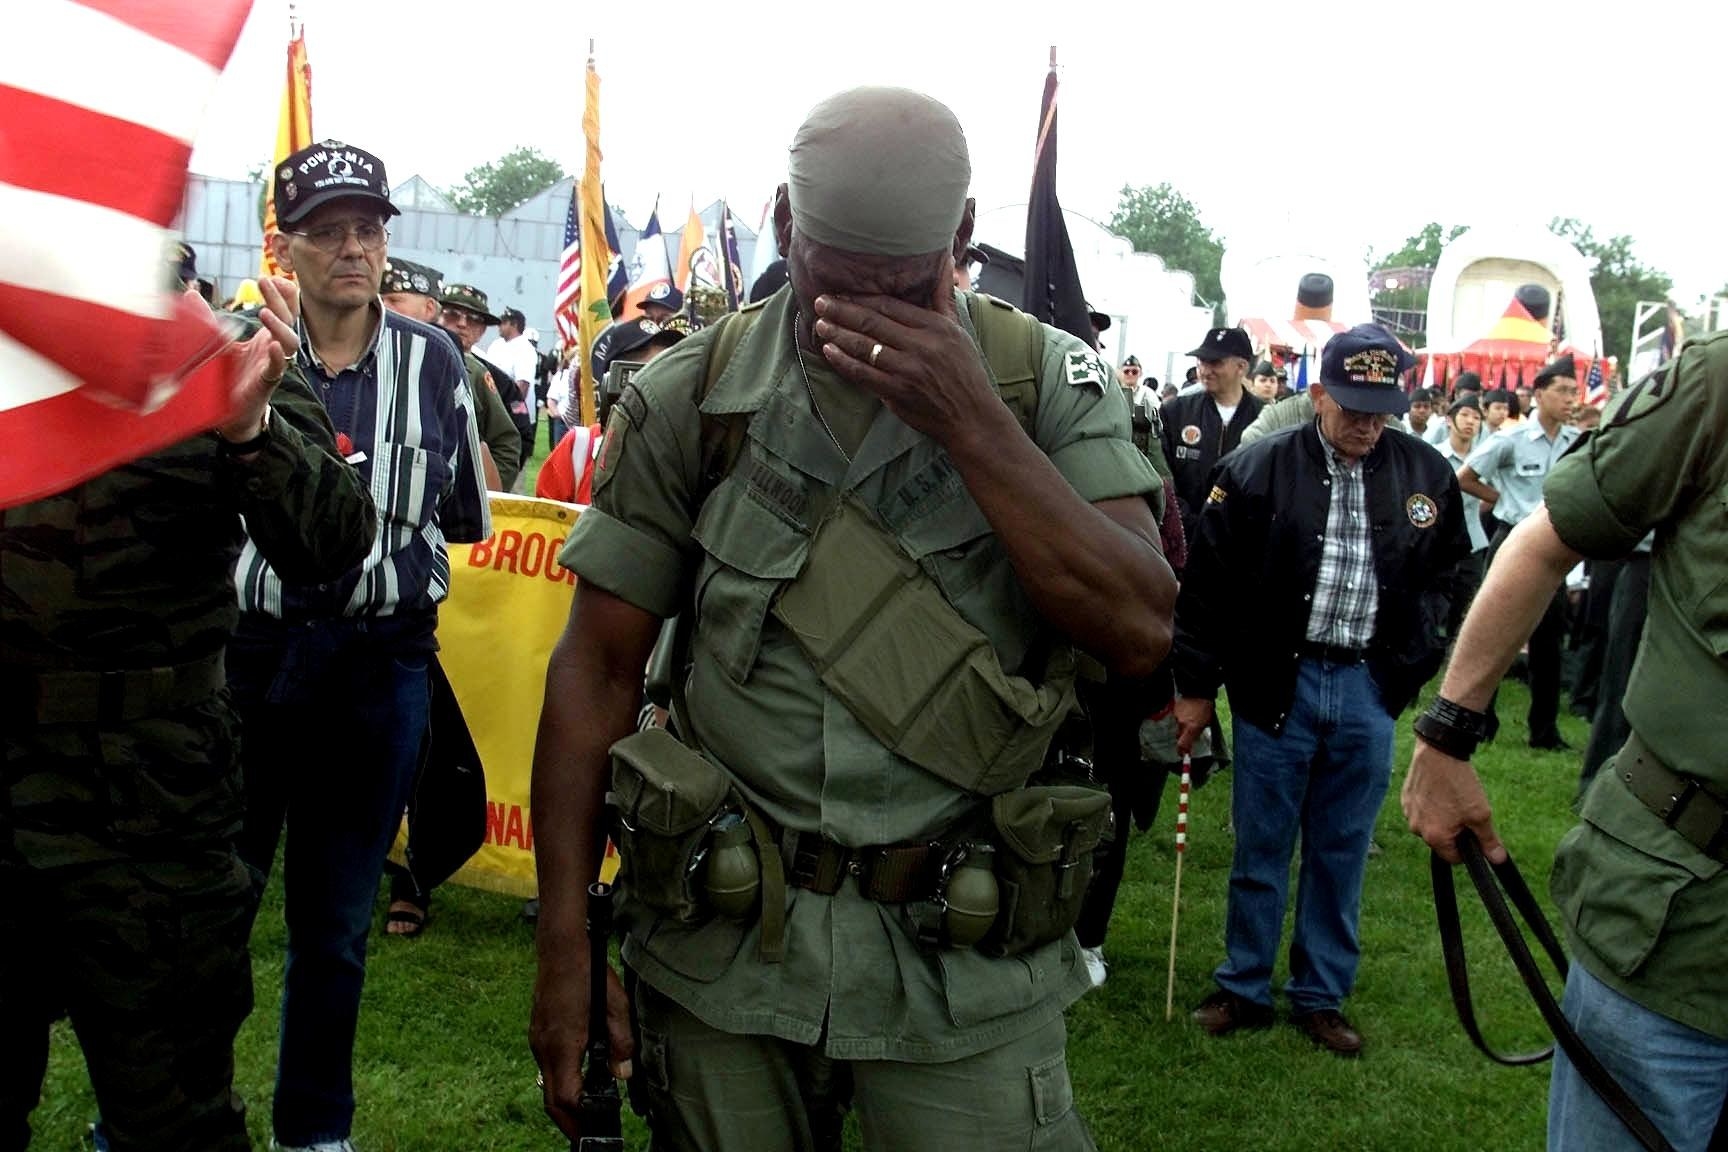 A picture of a soldier breaking down in tears at a memorial day celebration